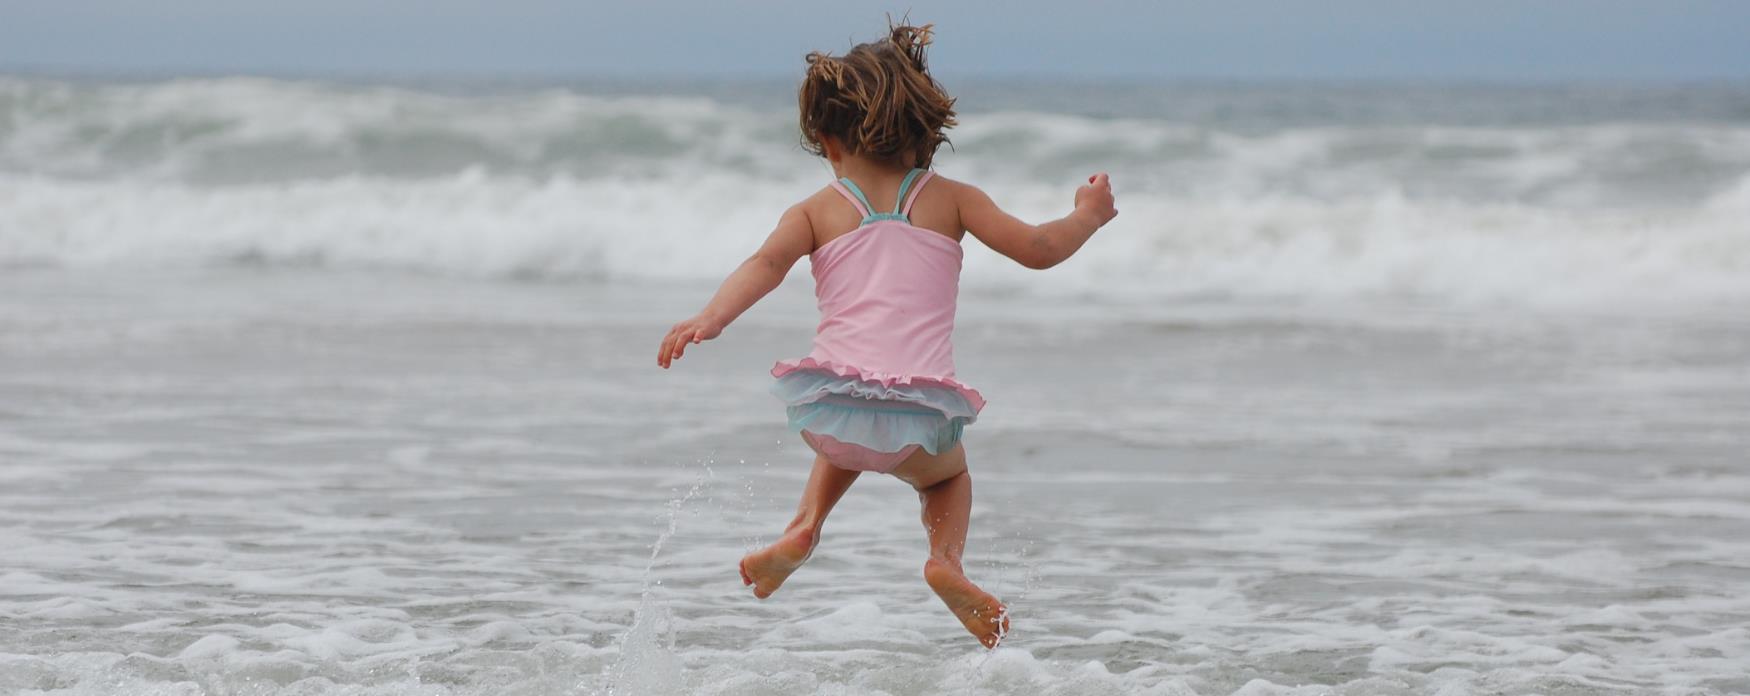 Child jumping in the waves at the seaside